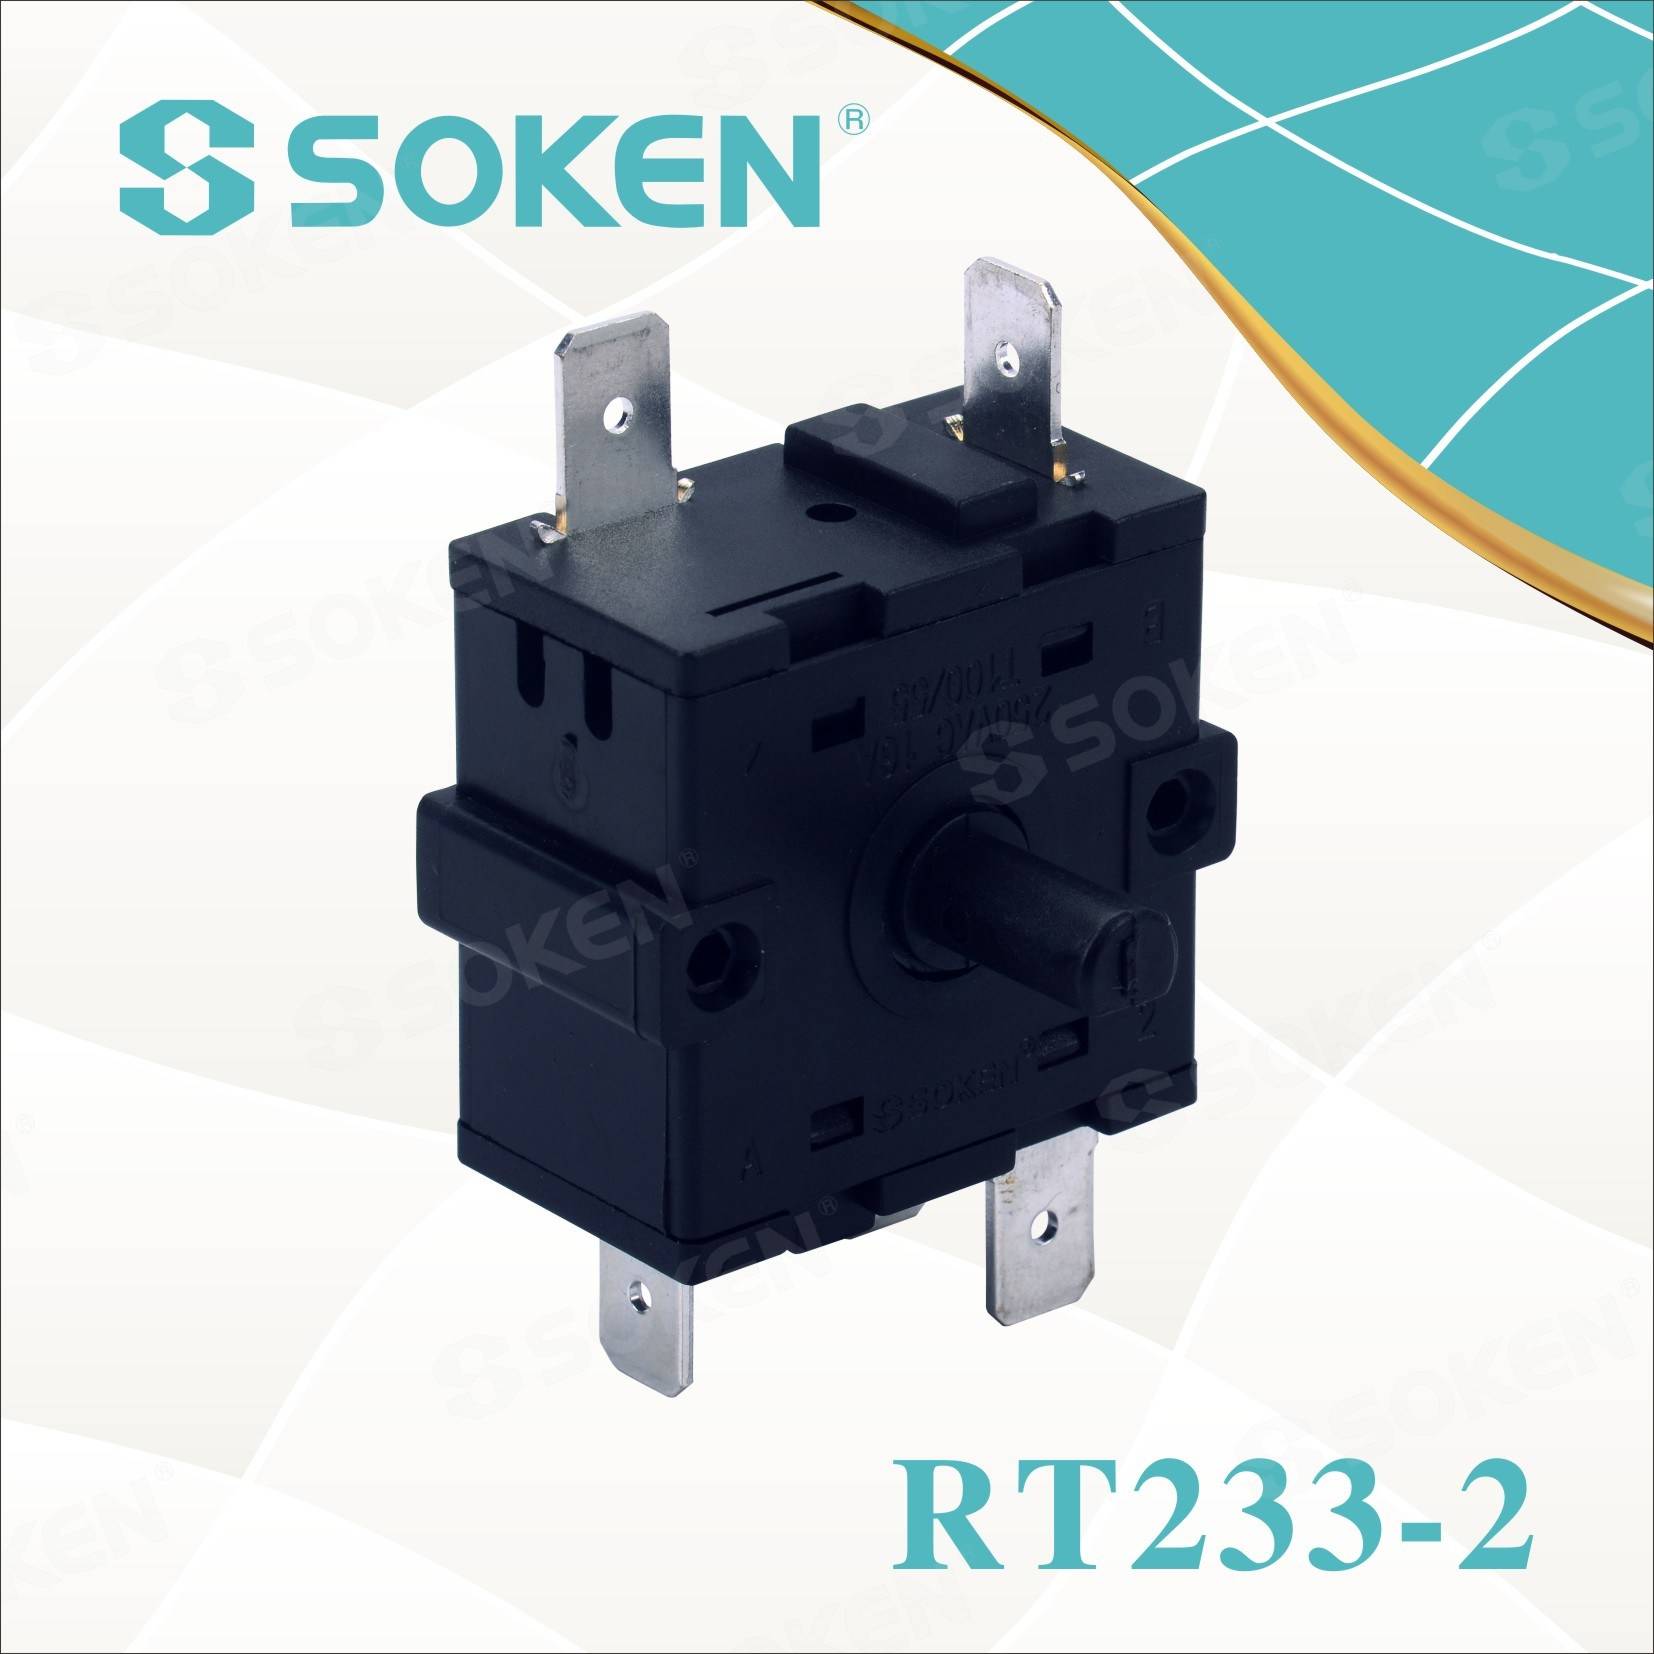 2018 wholesale price Key Switch With Blue Shaft -
 Soken Oil Heater Rotary Switch – Master Soken Electrical